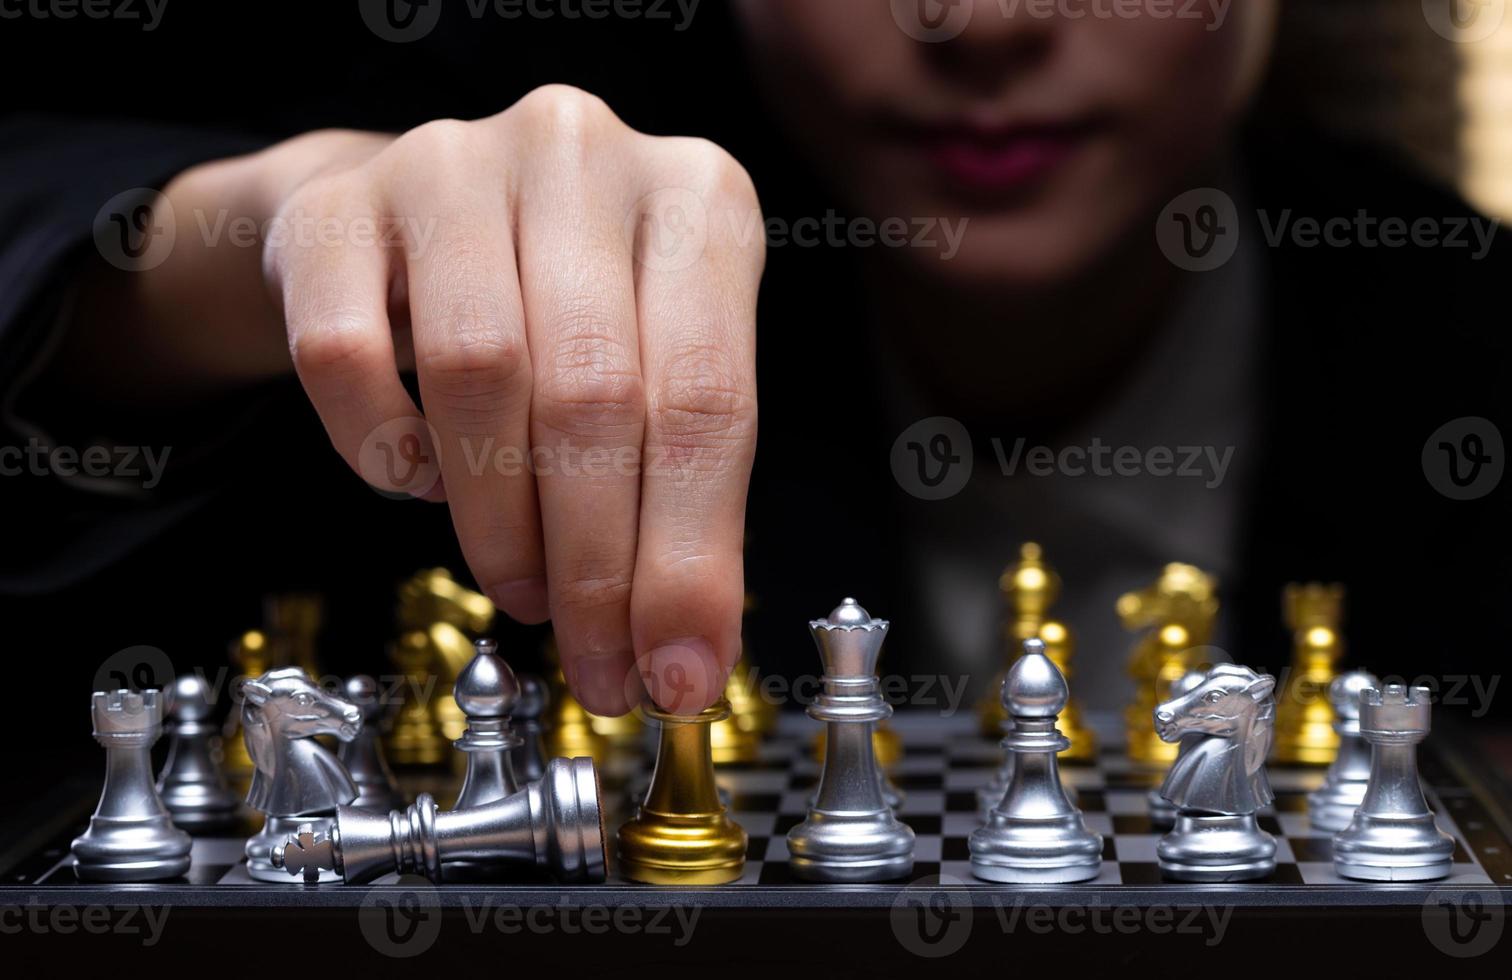 Business woman play Chess with close up Hand. Leader use strategy game to challenge competitor with intelligence leadership to move King to victory with management team idea fight, copy space photo